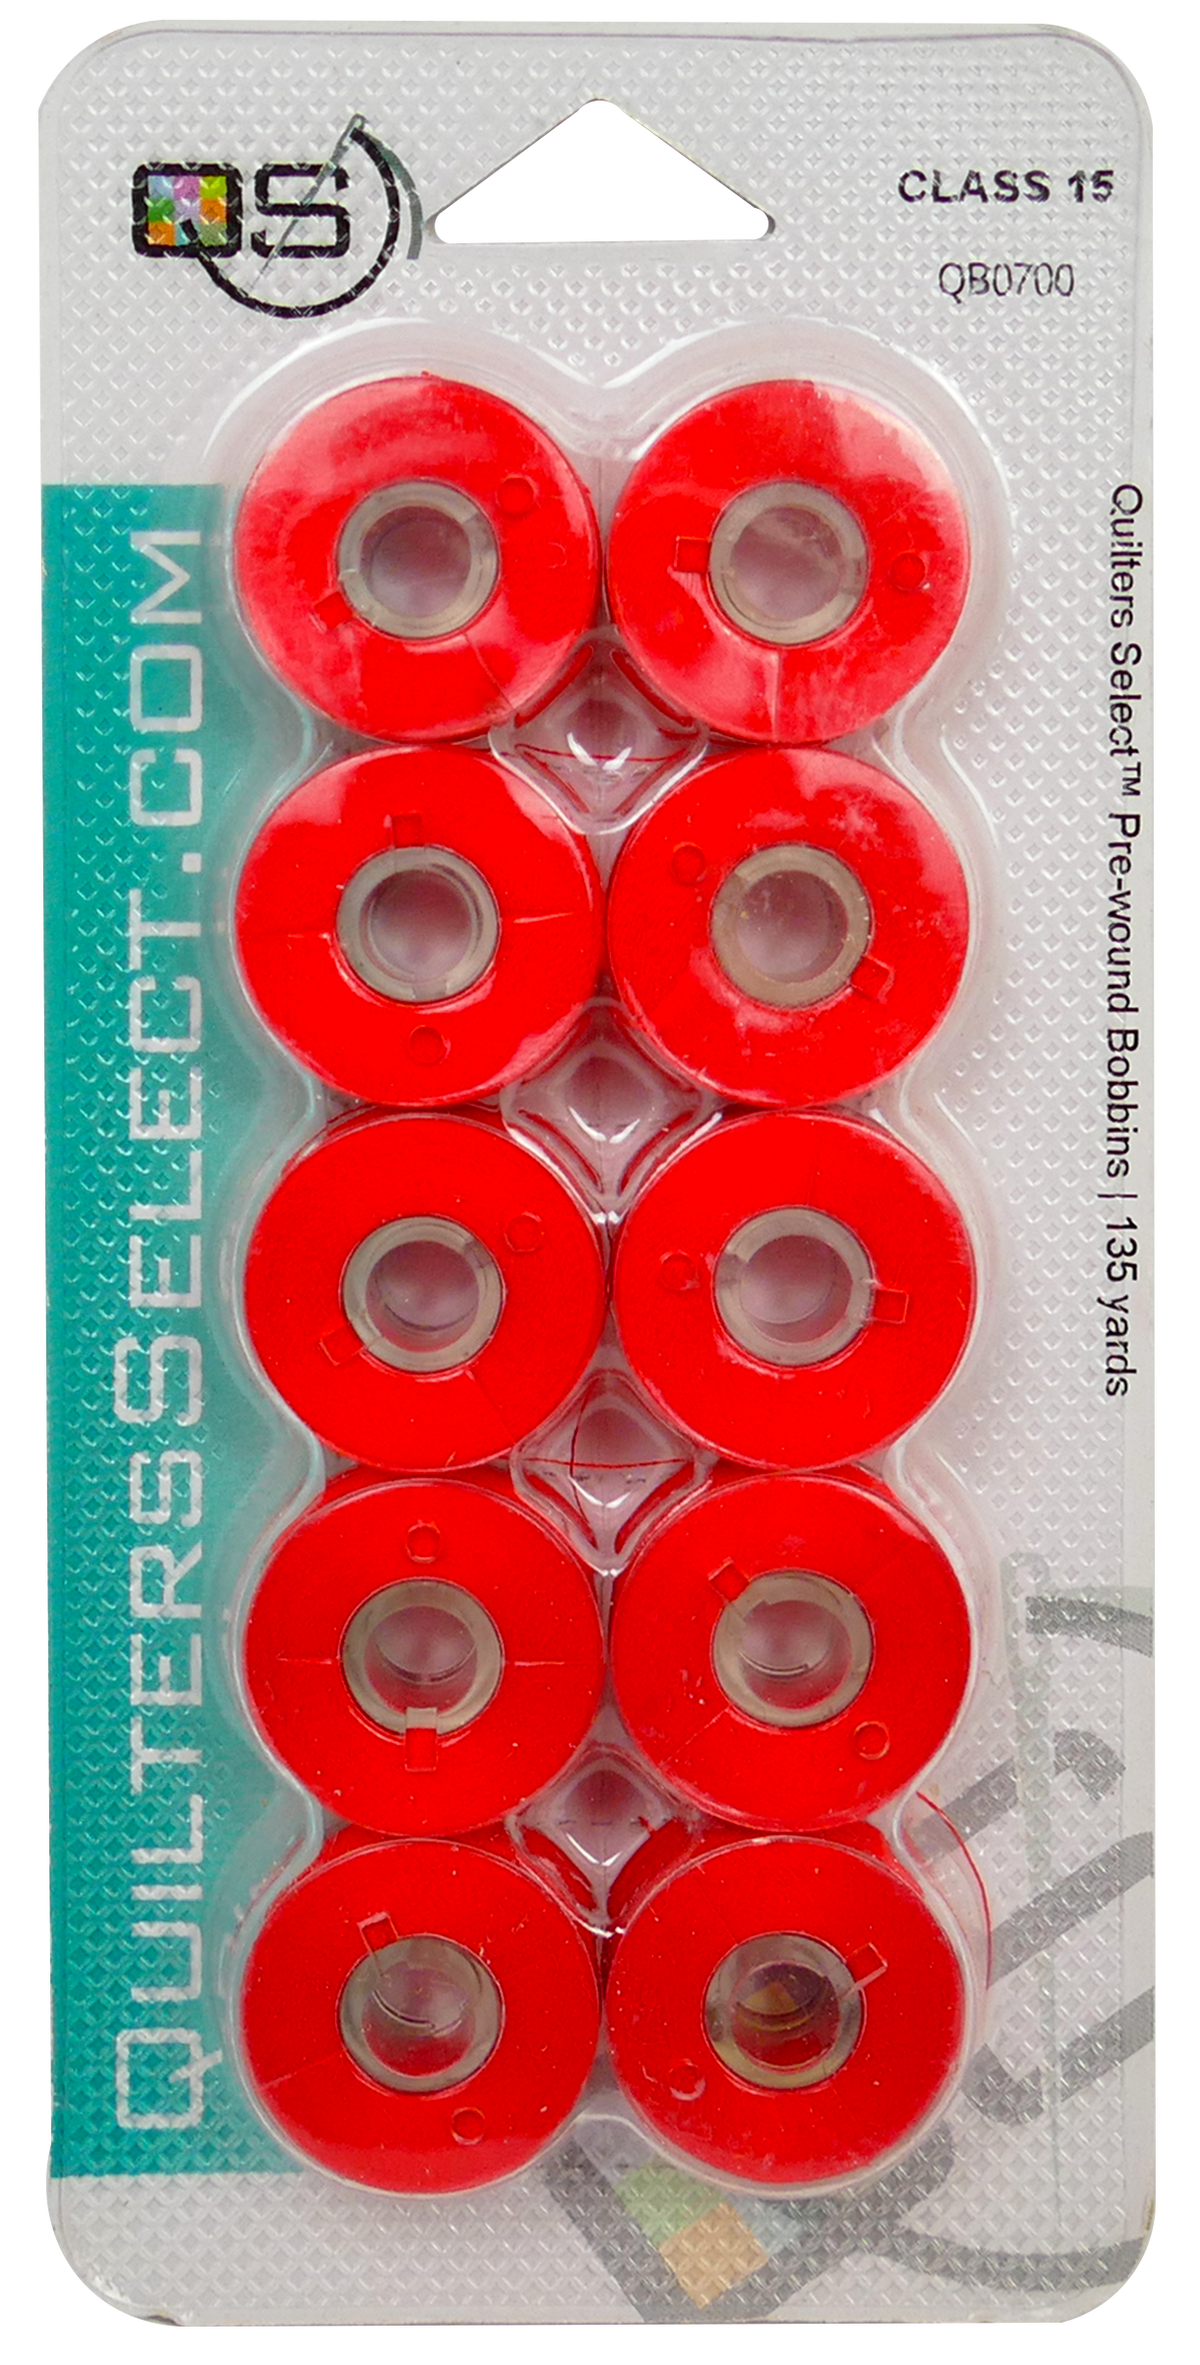 Quilters Select 80wt Para Cotton Poly Bobbins 0700 Mars Red  10 Class 15 Bobbins